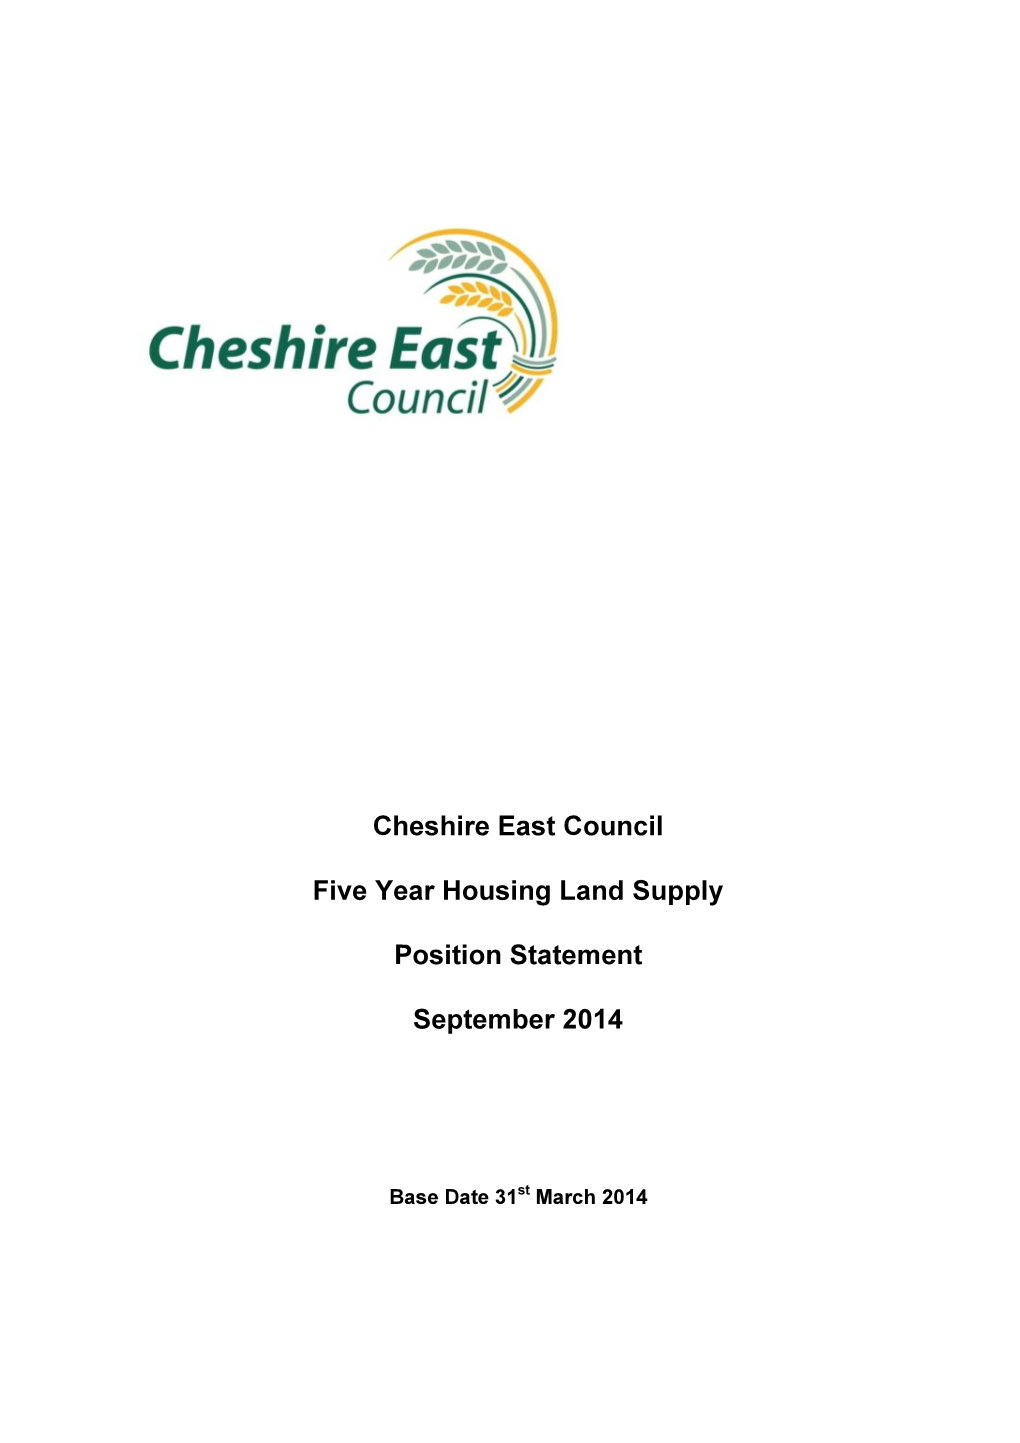 Cheshire East Council Five Year Housing Land Supply Position